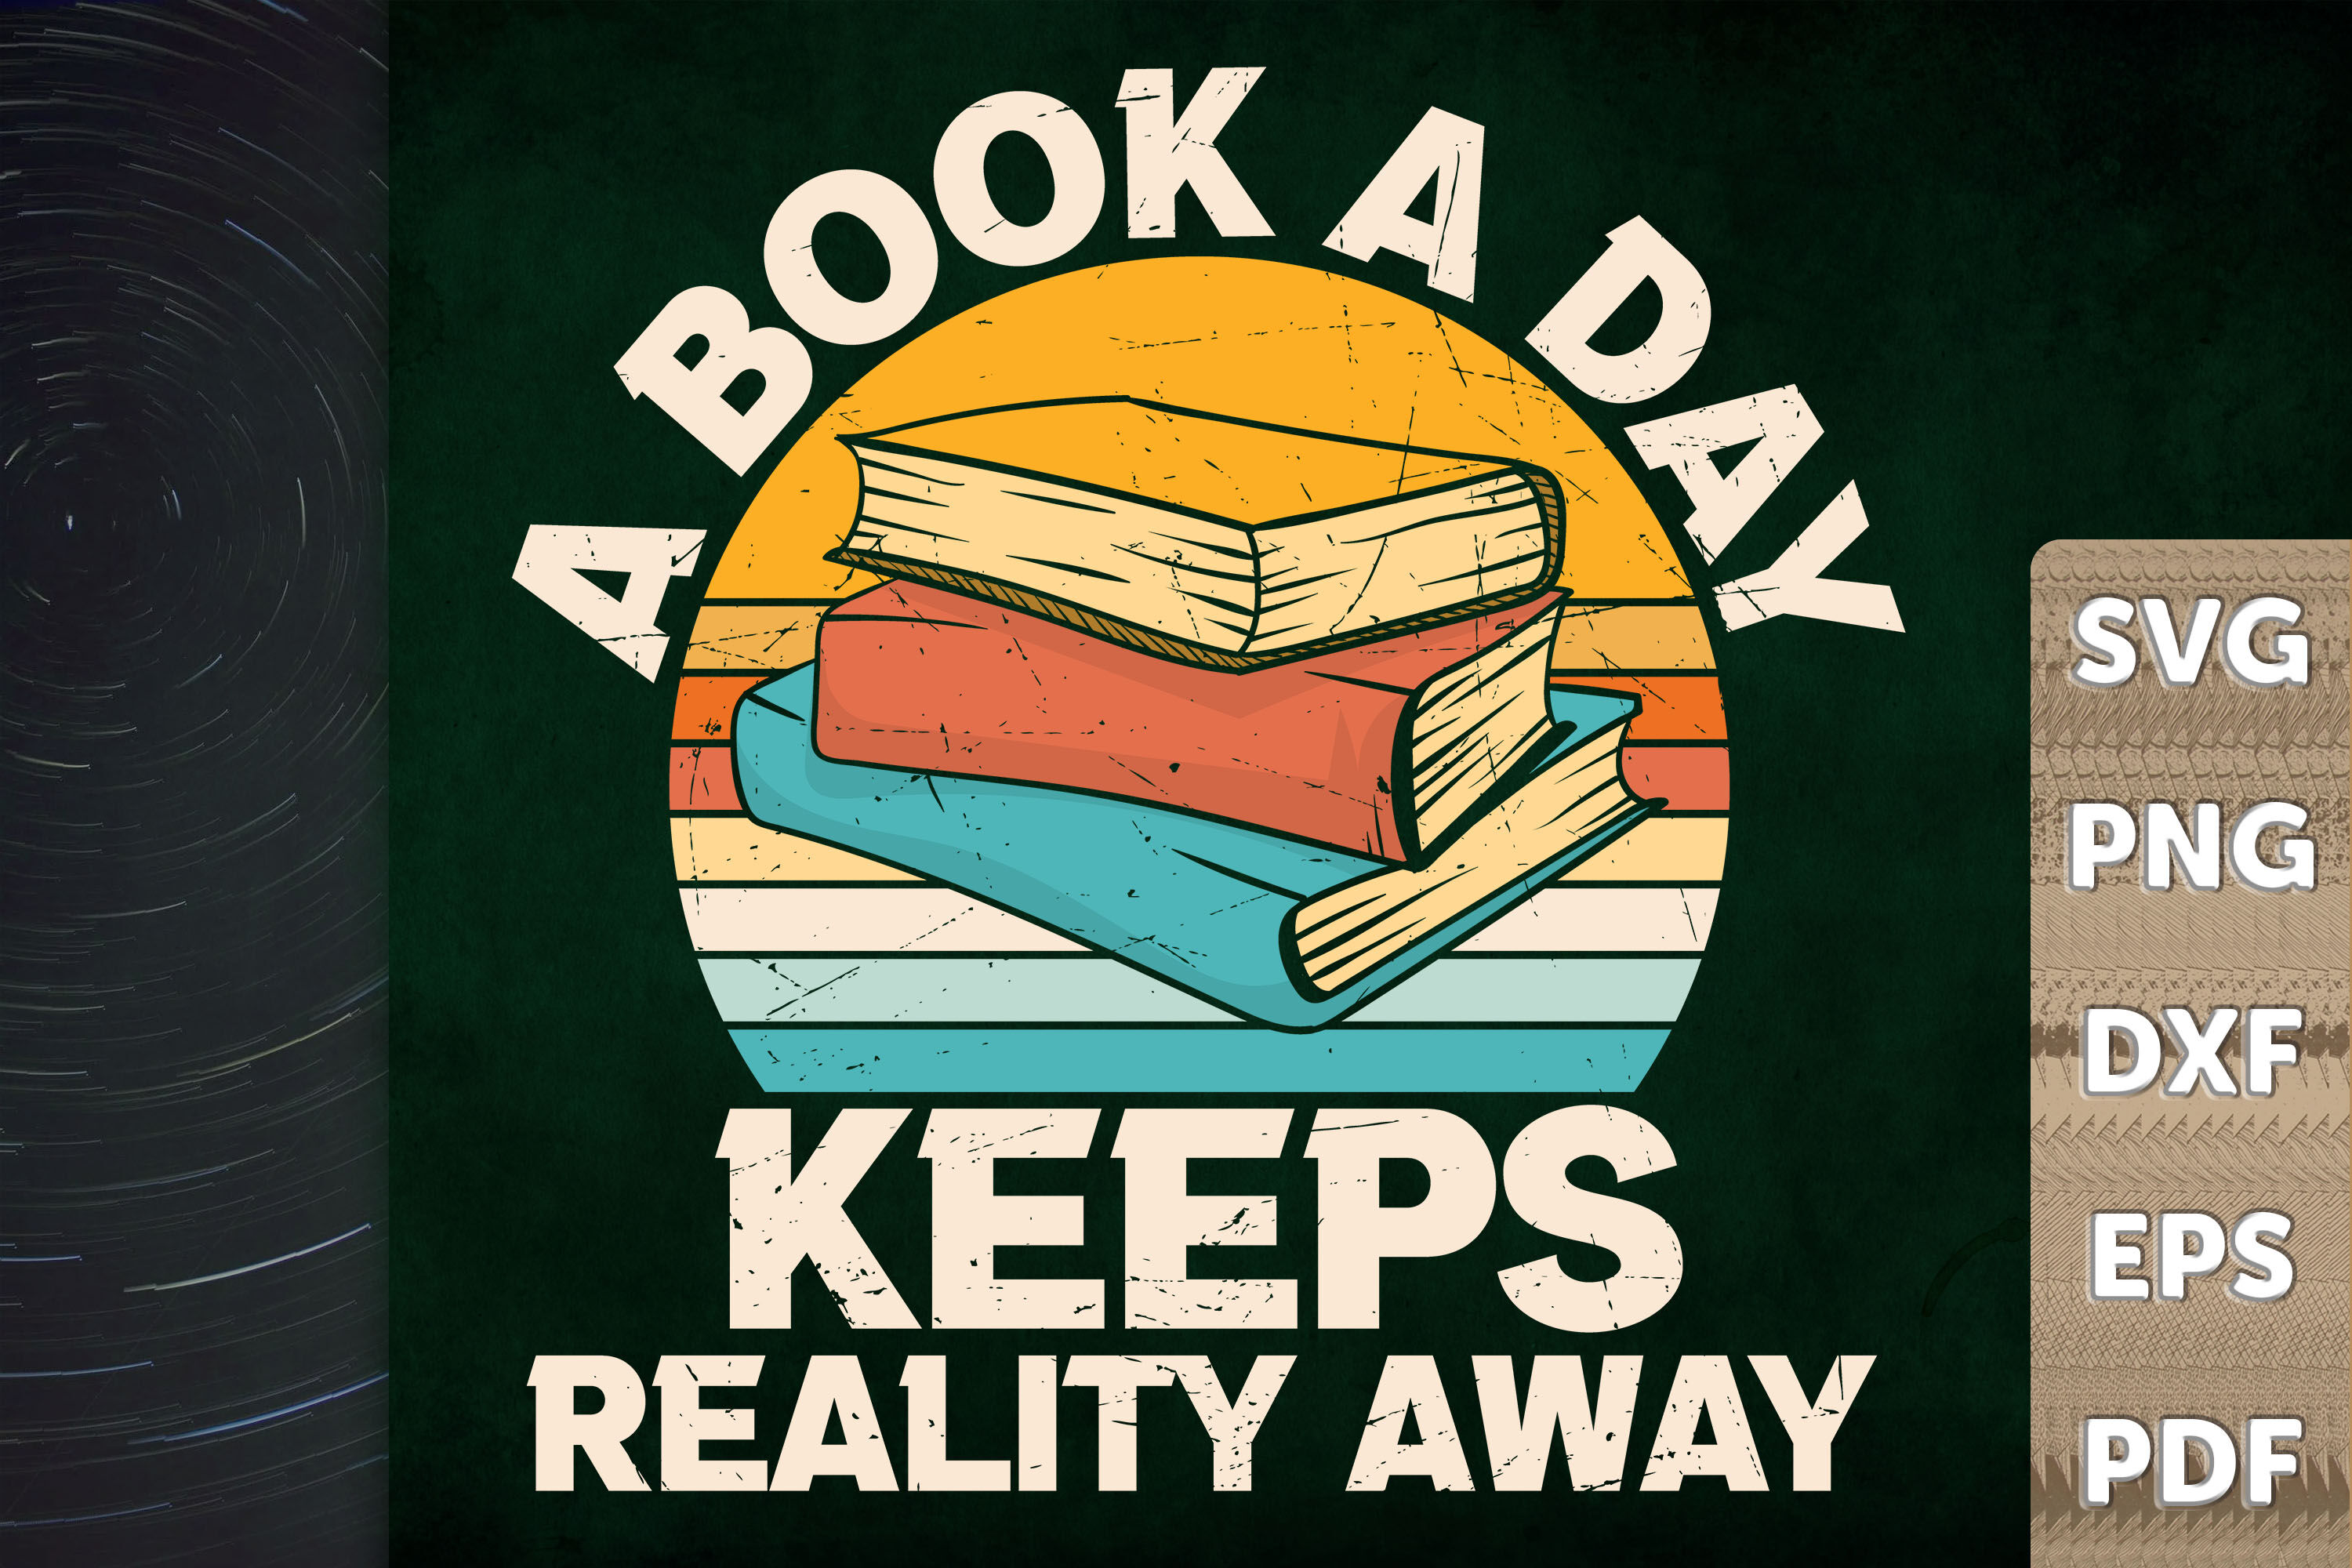 A book a day Keeps reality away - 3x3